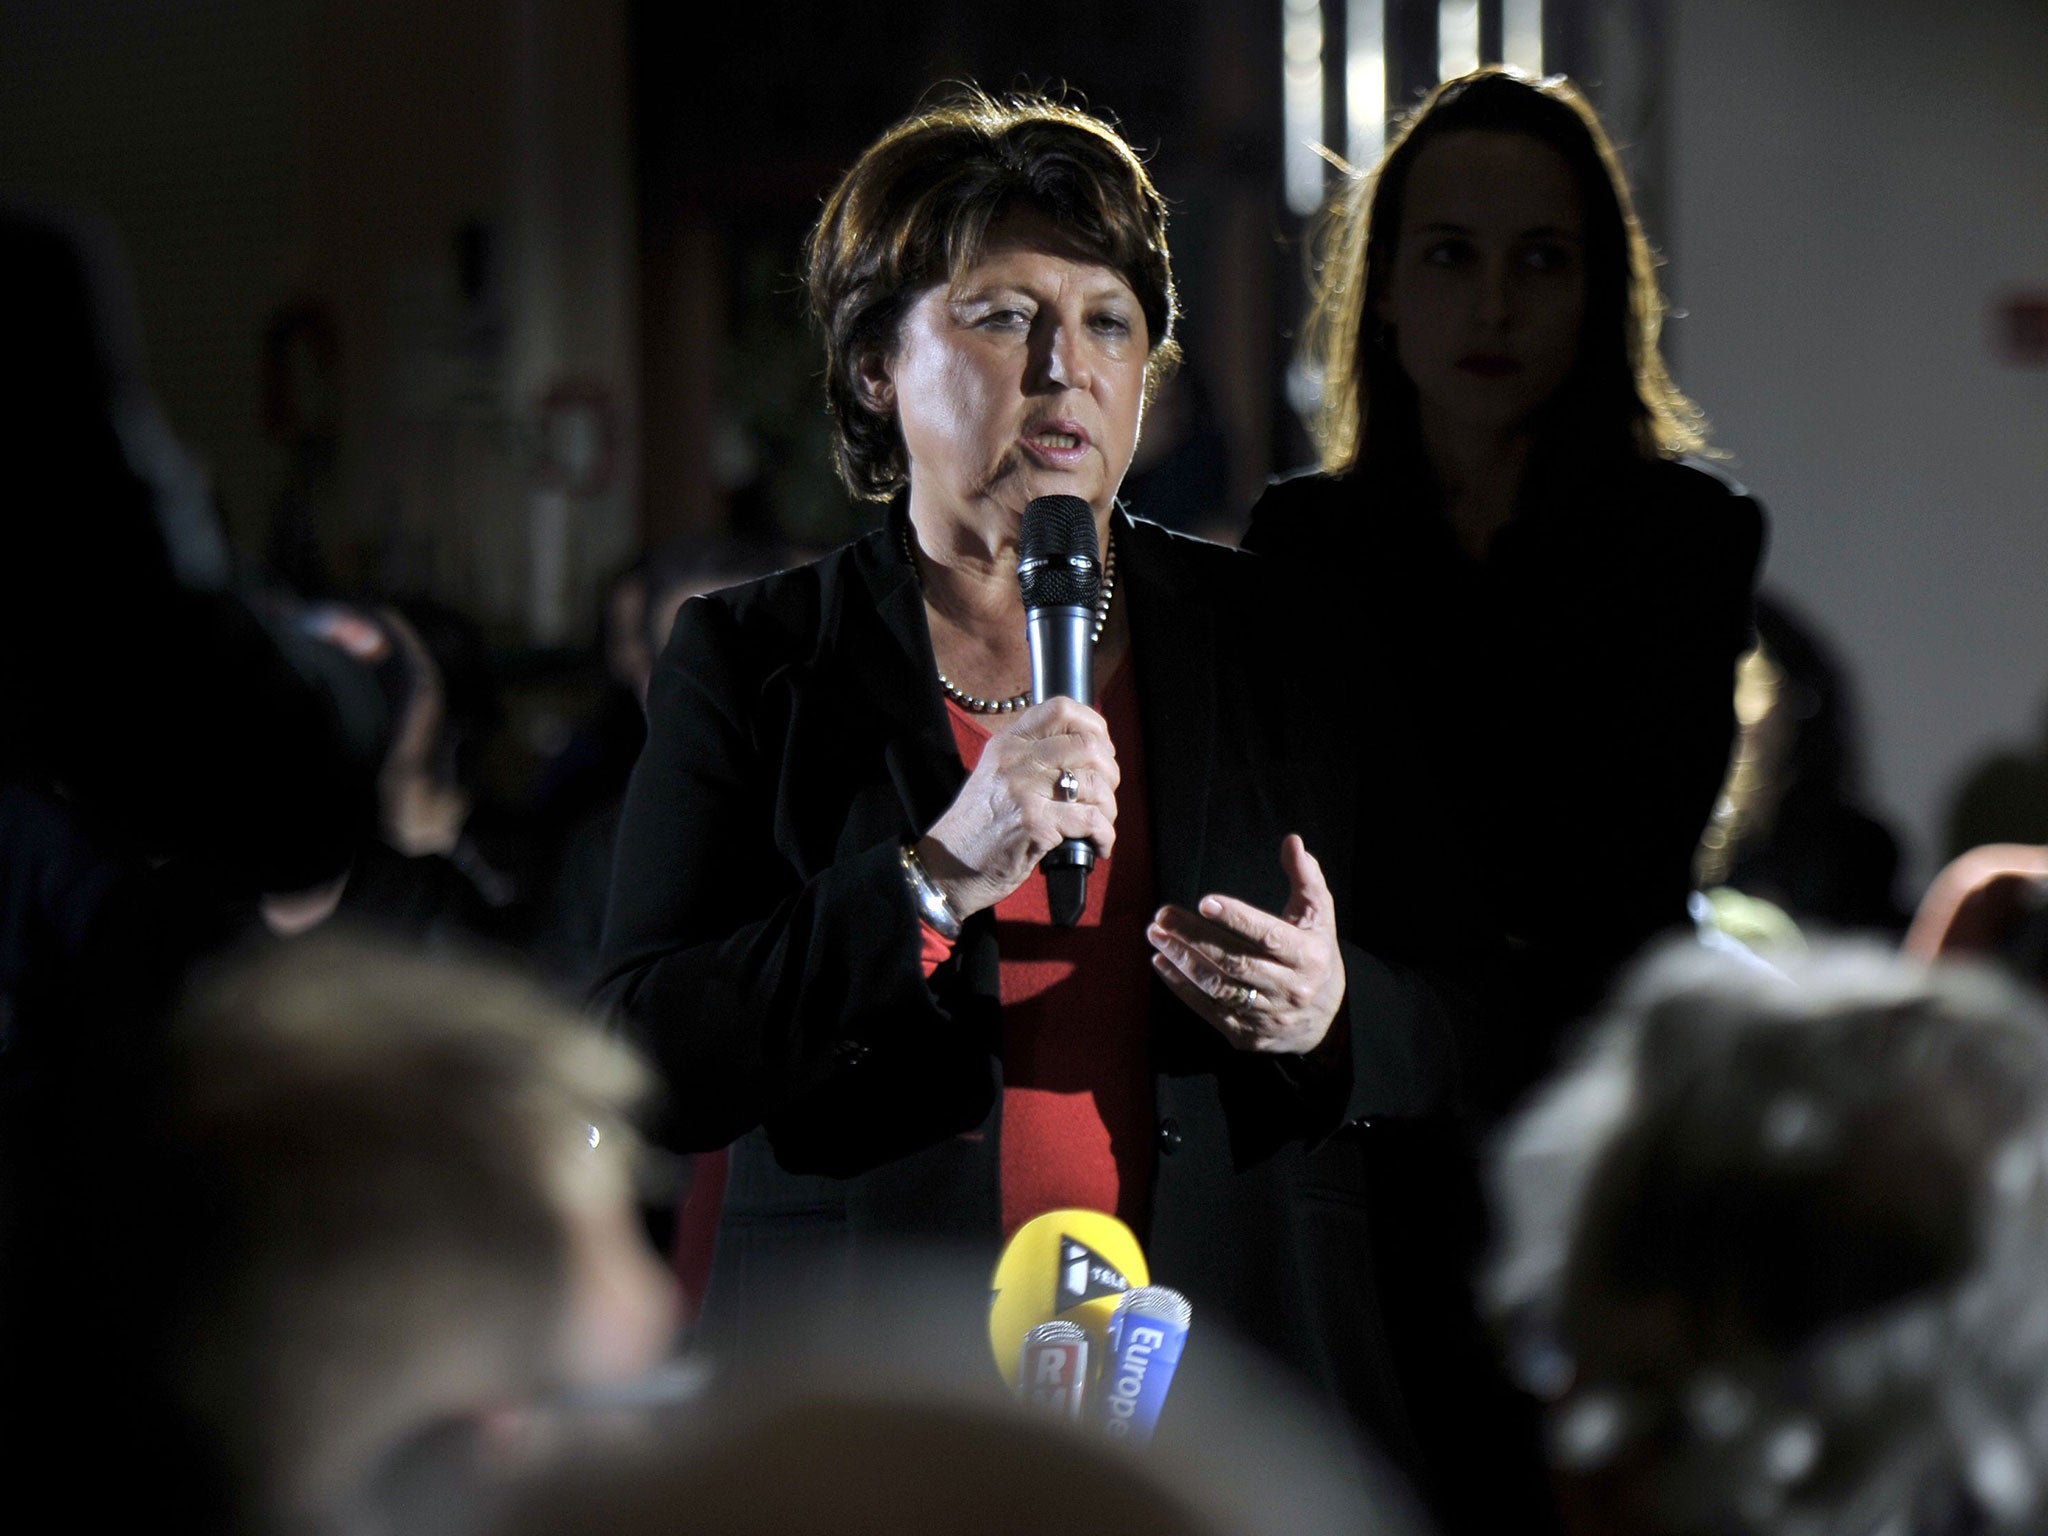 Former Socialist leader Martine Aubry, the ‘mother of the 35-hour week’, has led protests